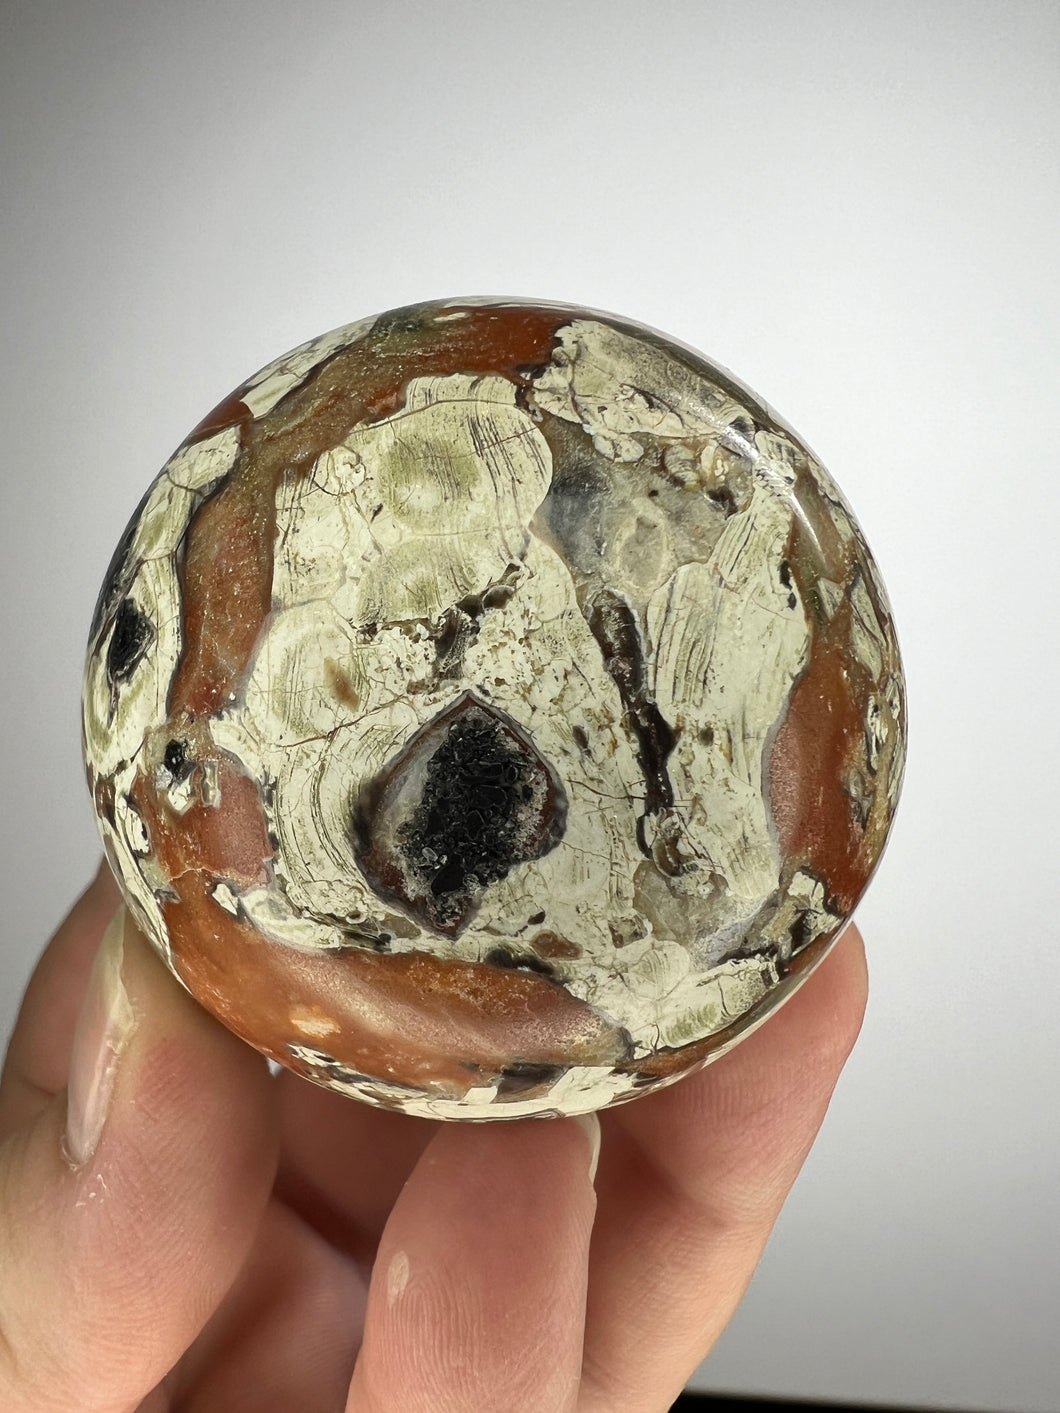 Opal + Quartz + Chalcedony Sphere from South Africa